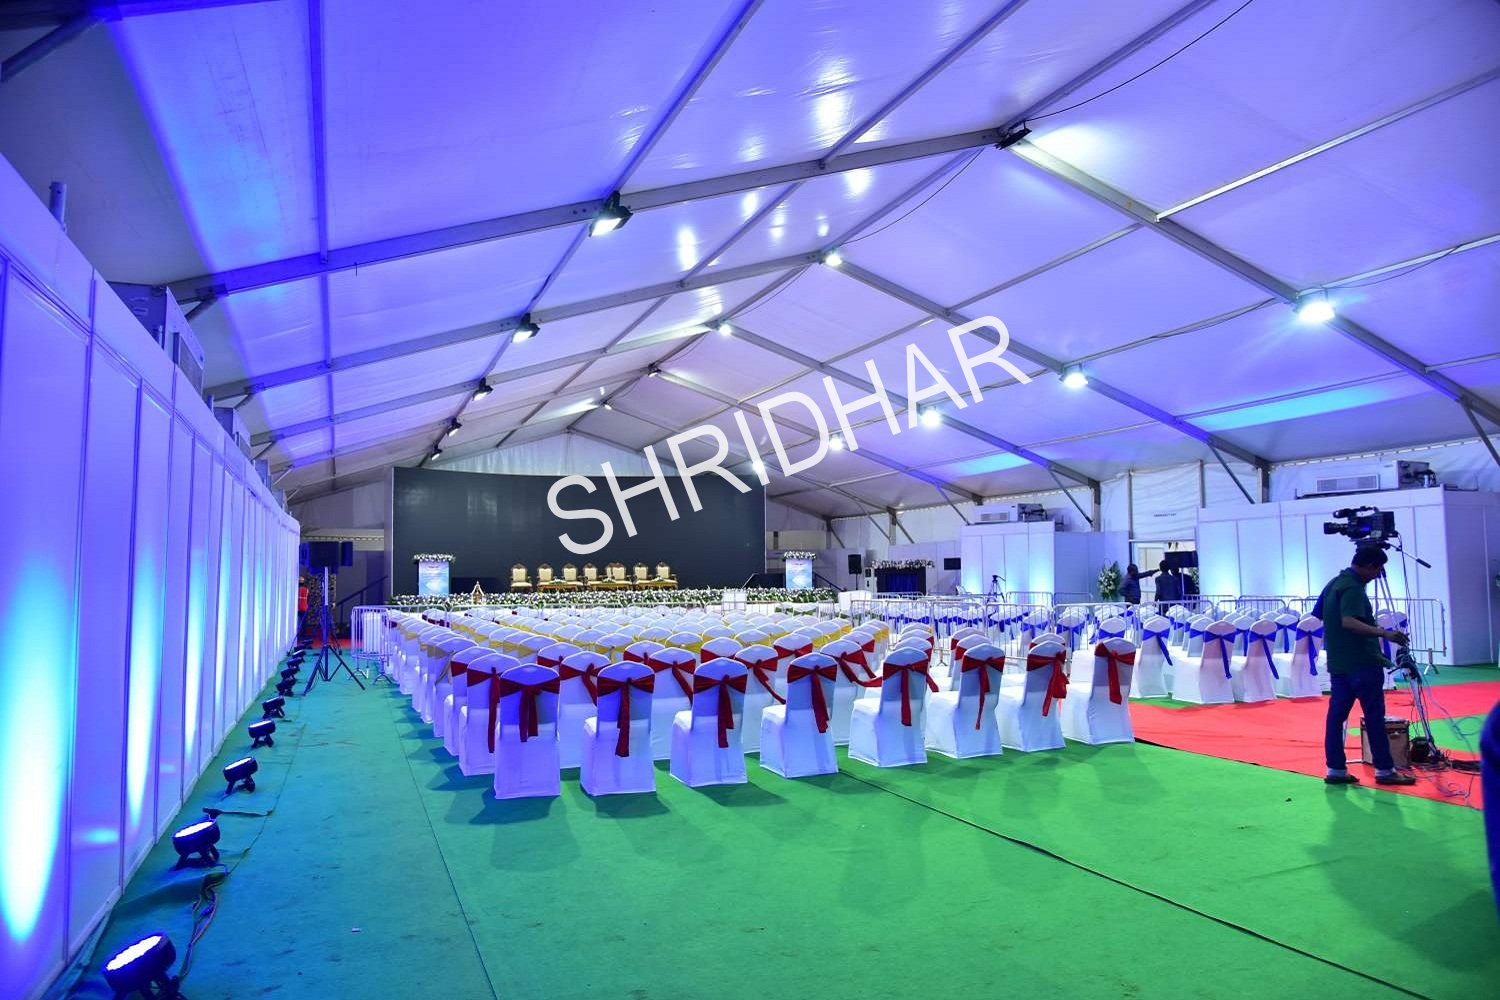 lighting and chairs with cloth covering for rent for hire for conferences in bangalore shridhar tent house